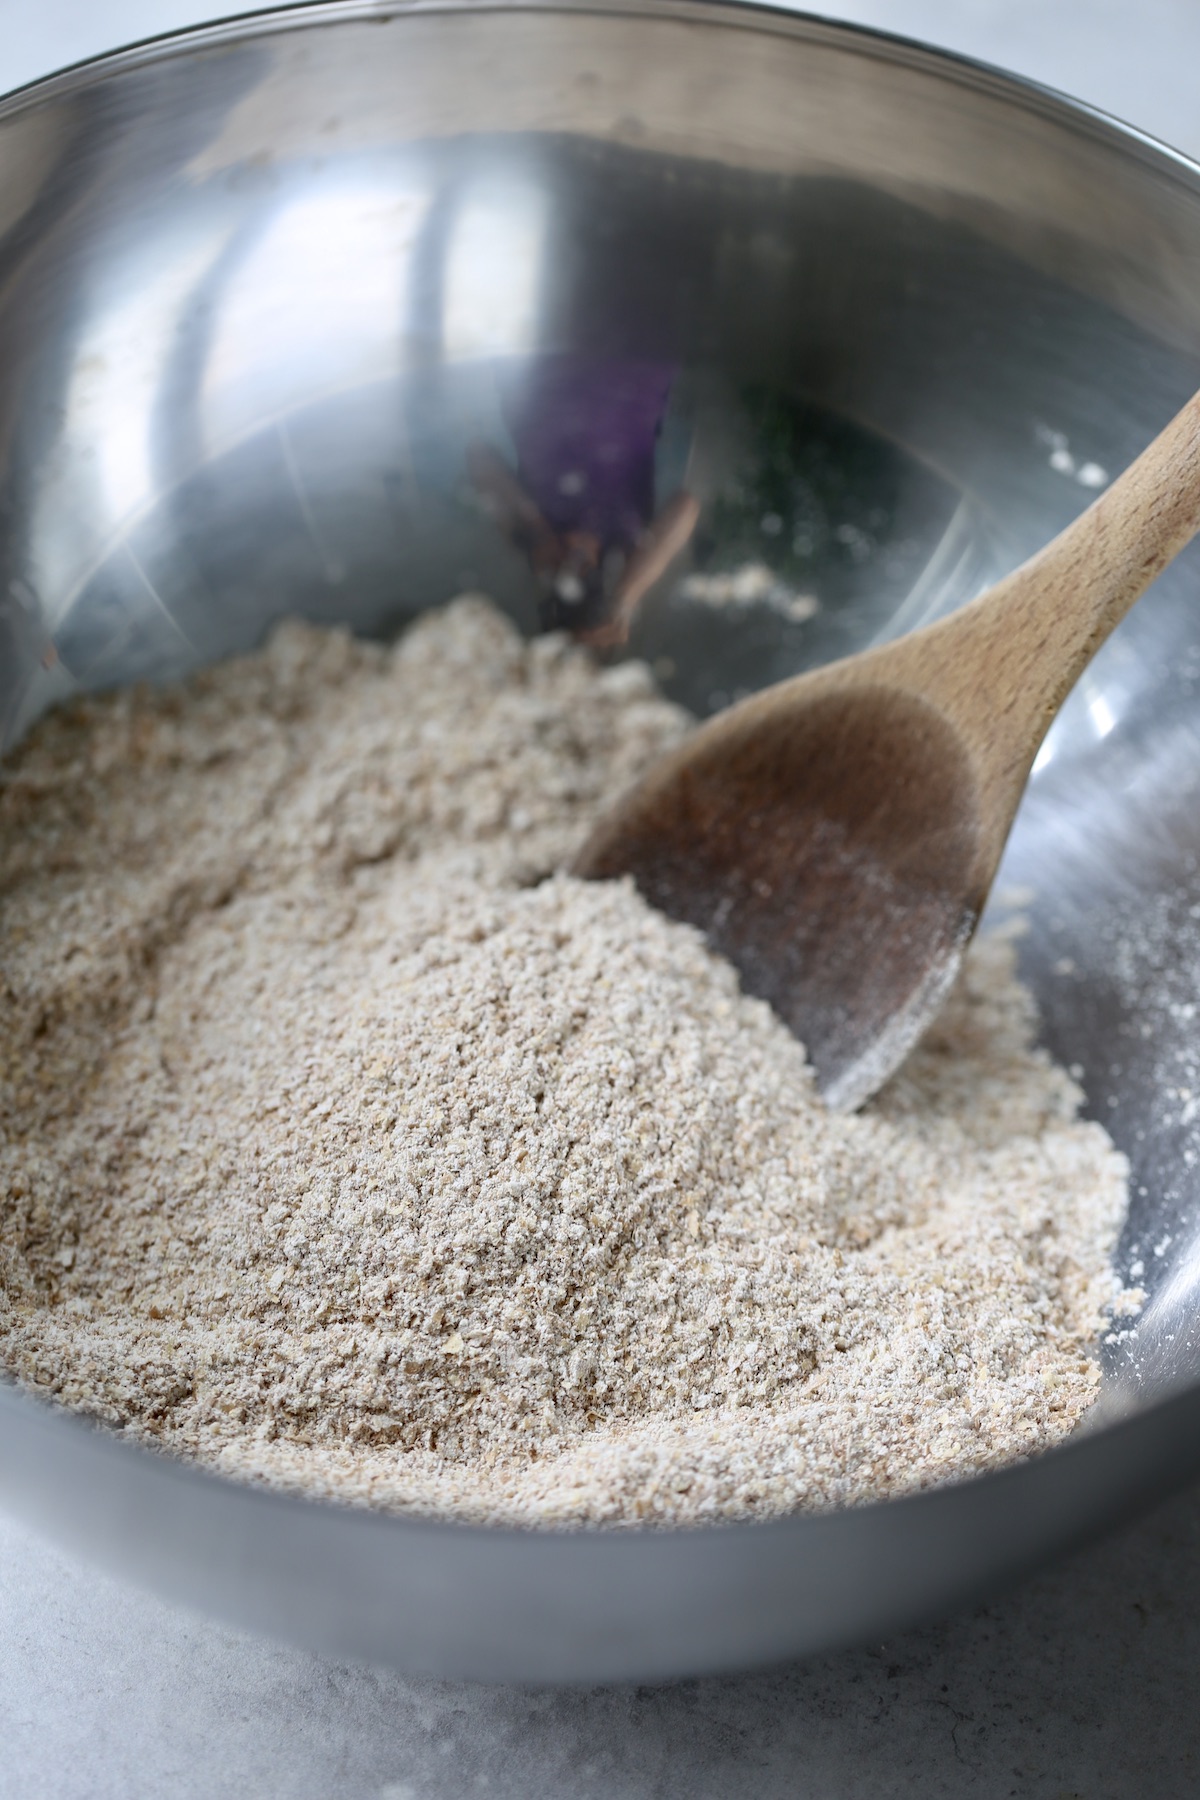 Flour and wheat bran being stirred together in a metal mixing bowl with a wooden spoon.